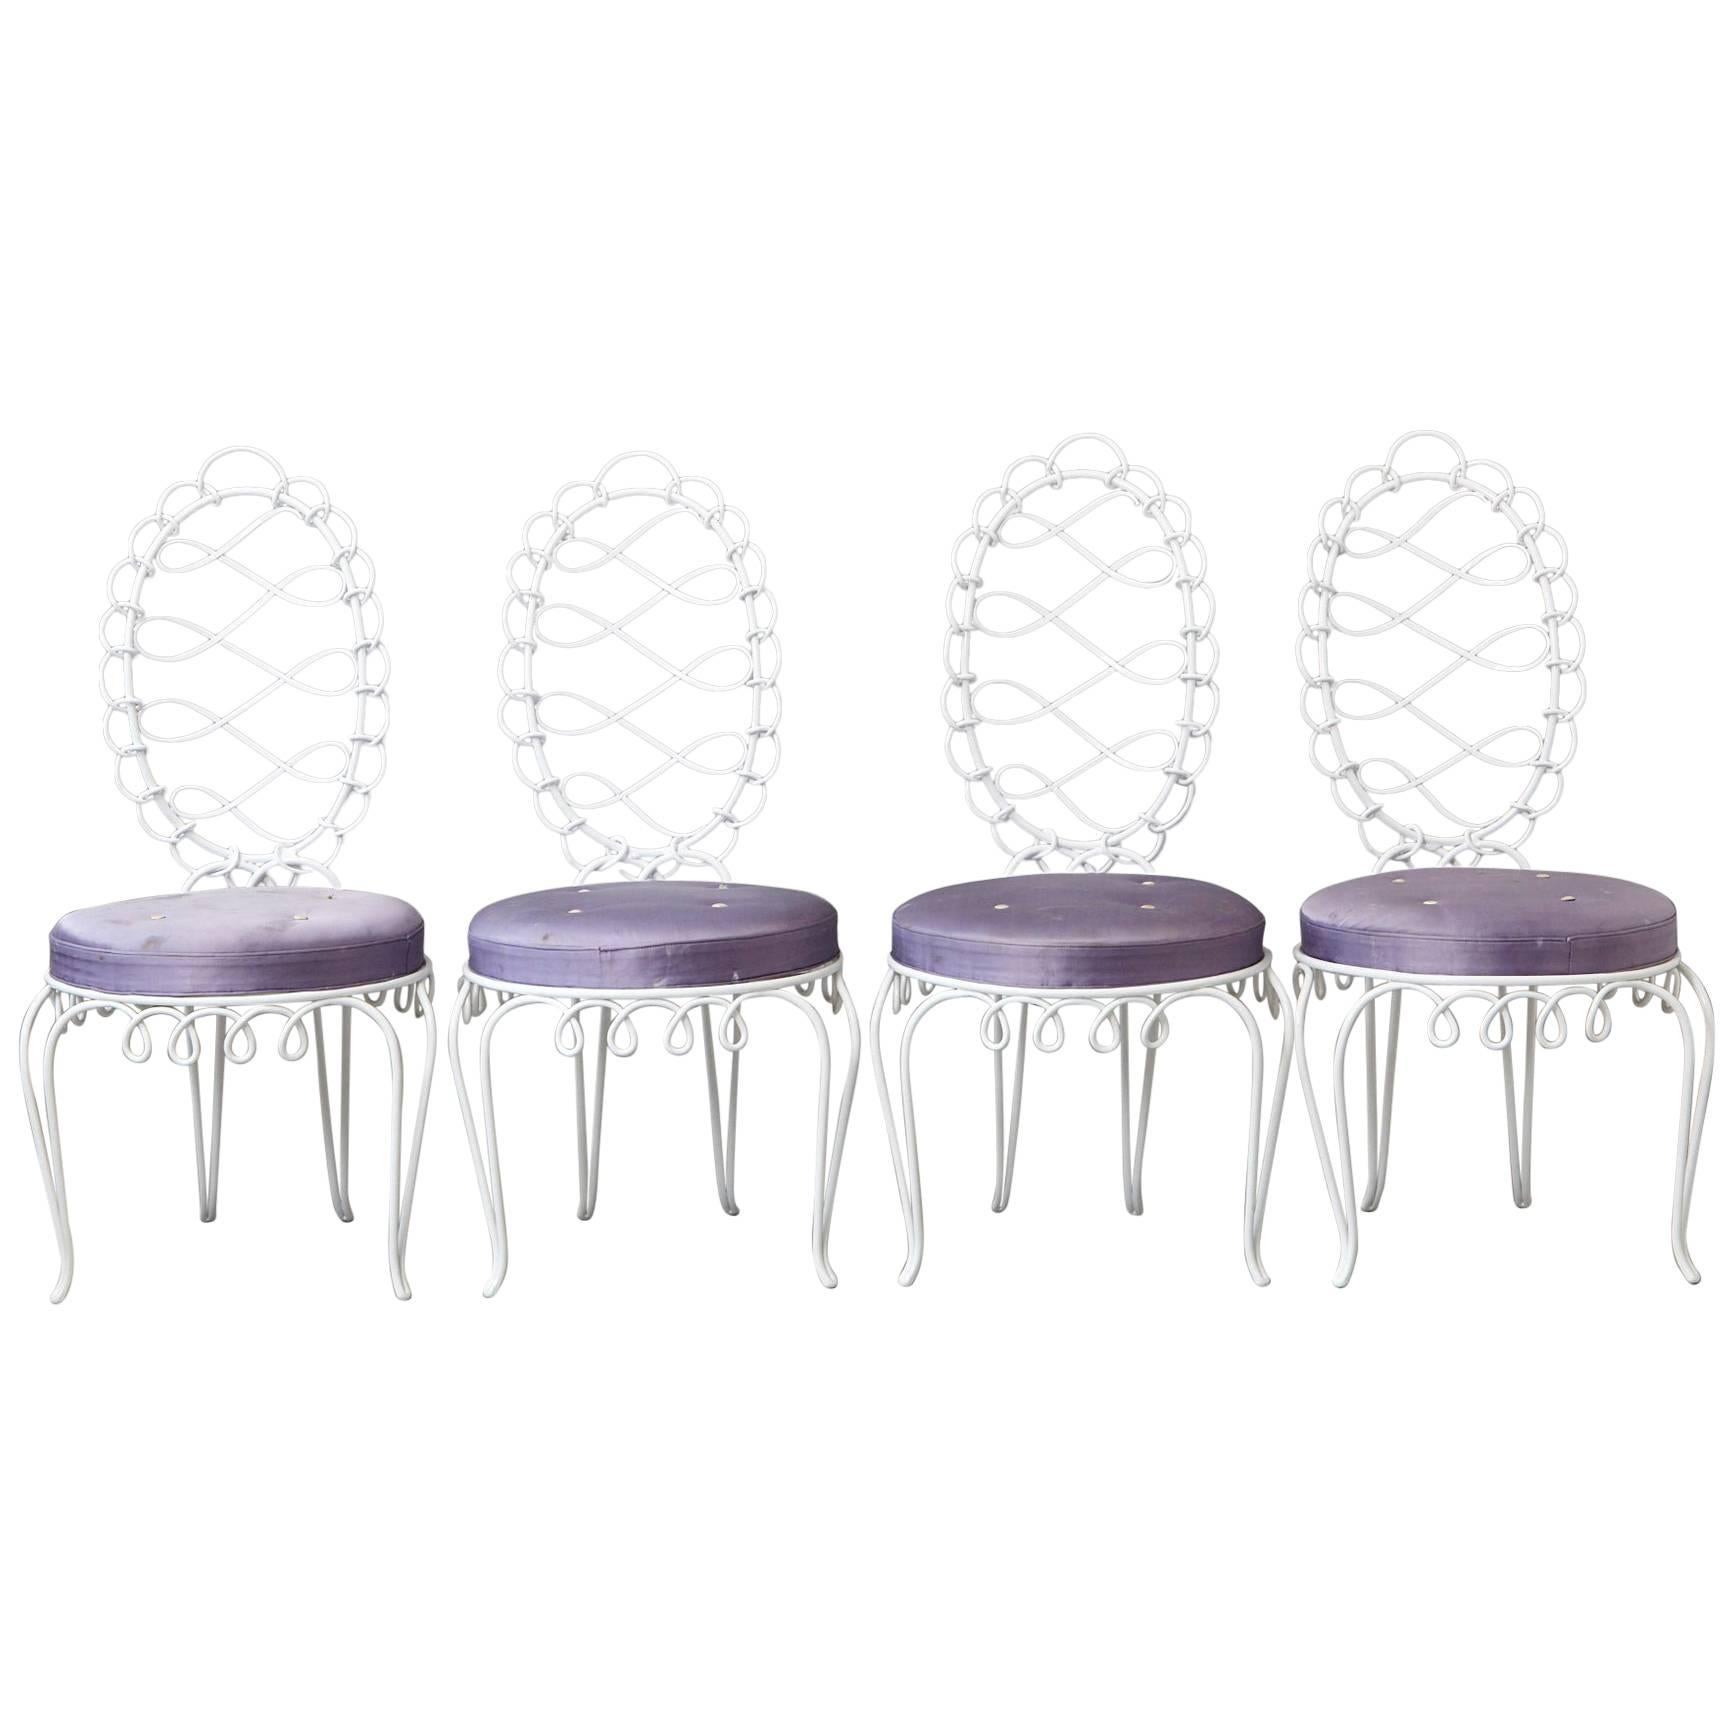 Set of Four René Prou 'Fer Forgé Rond' Iron Side Chairs, France 1940's For Sale